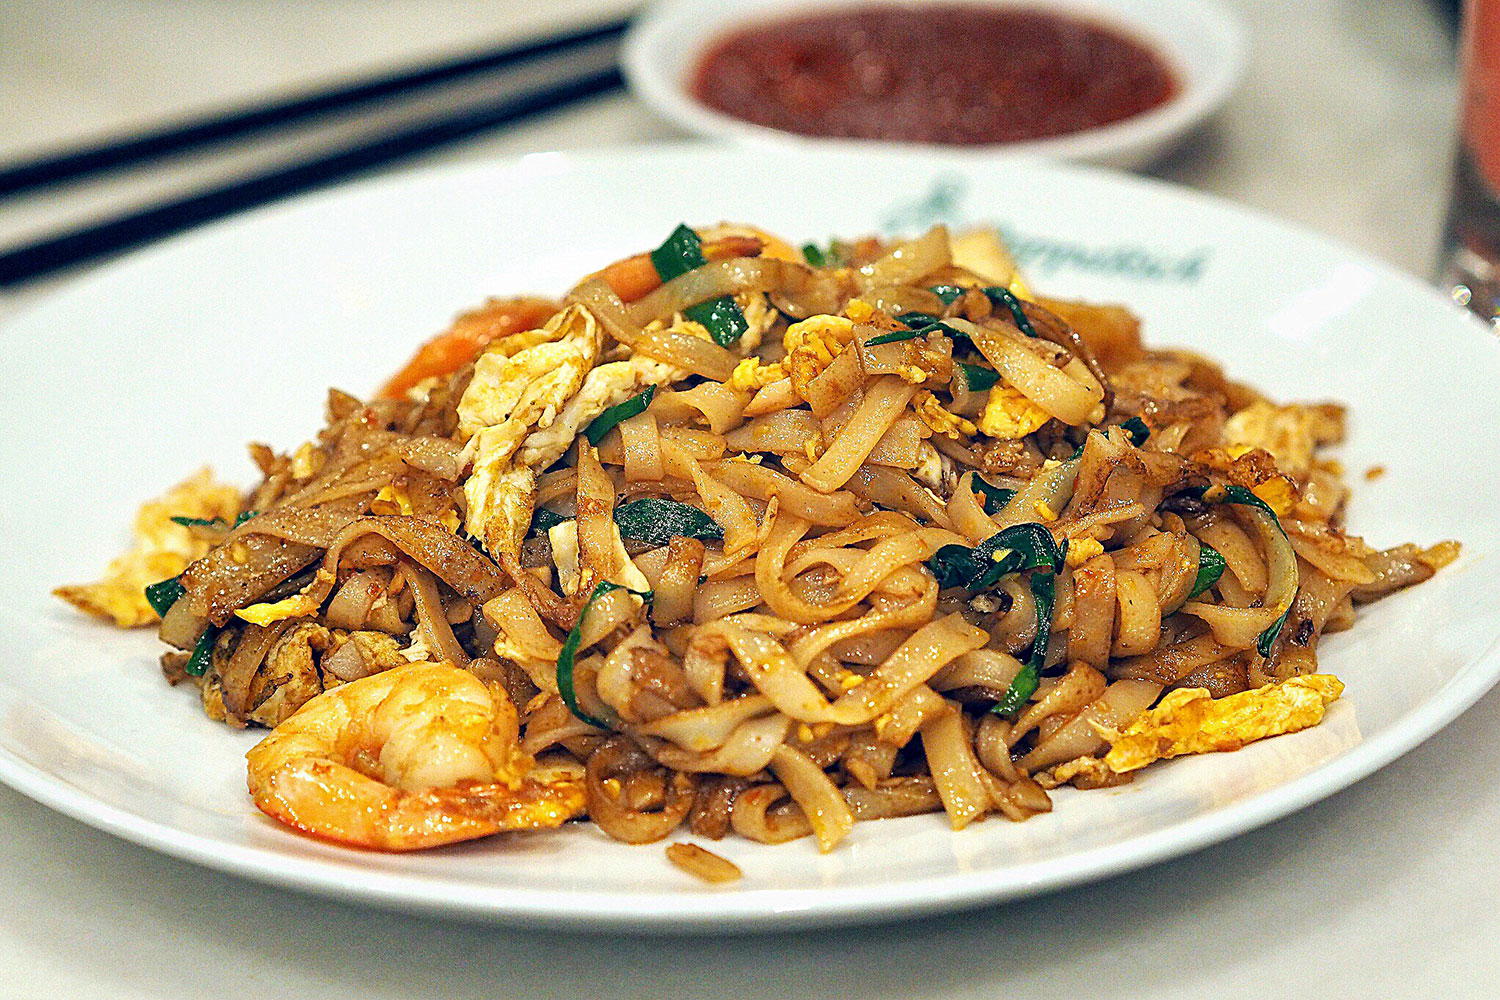 Sydney Food Blog Review of Pappa Rich, Parramatta: Char Kway Teow